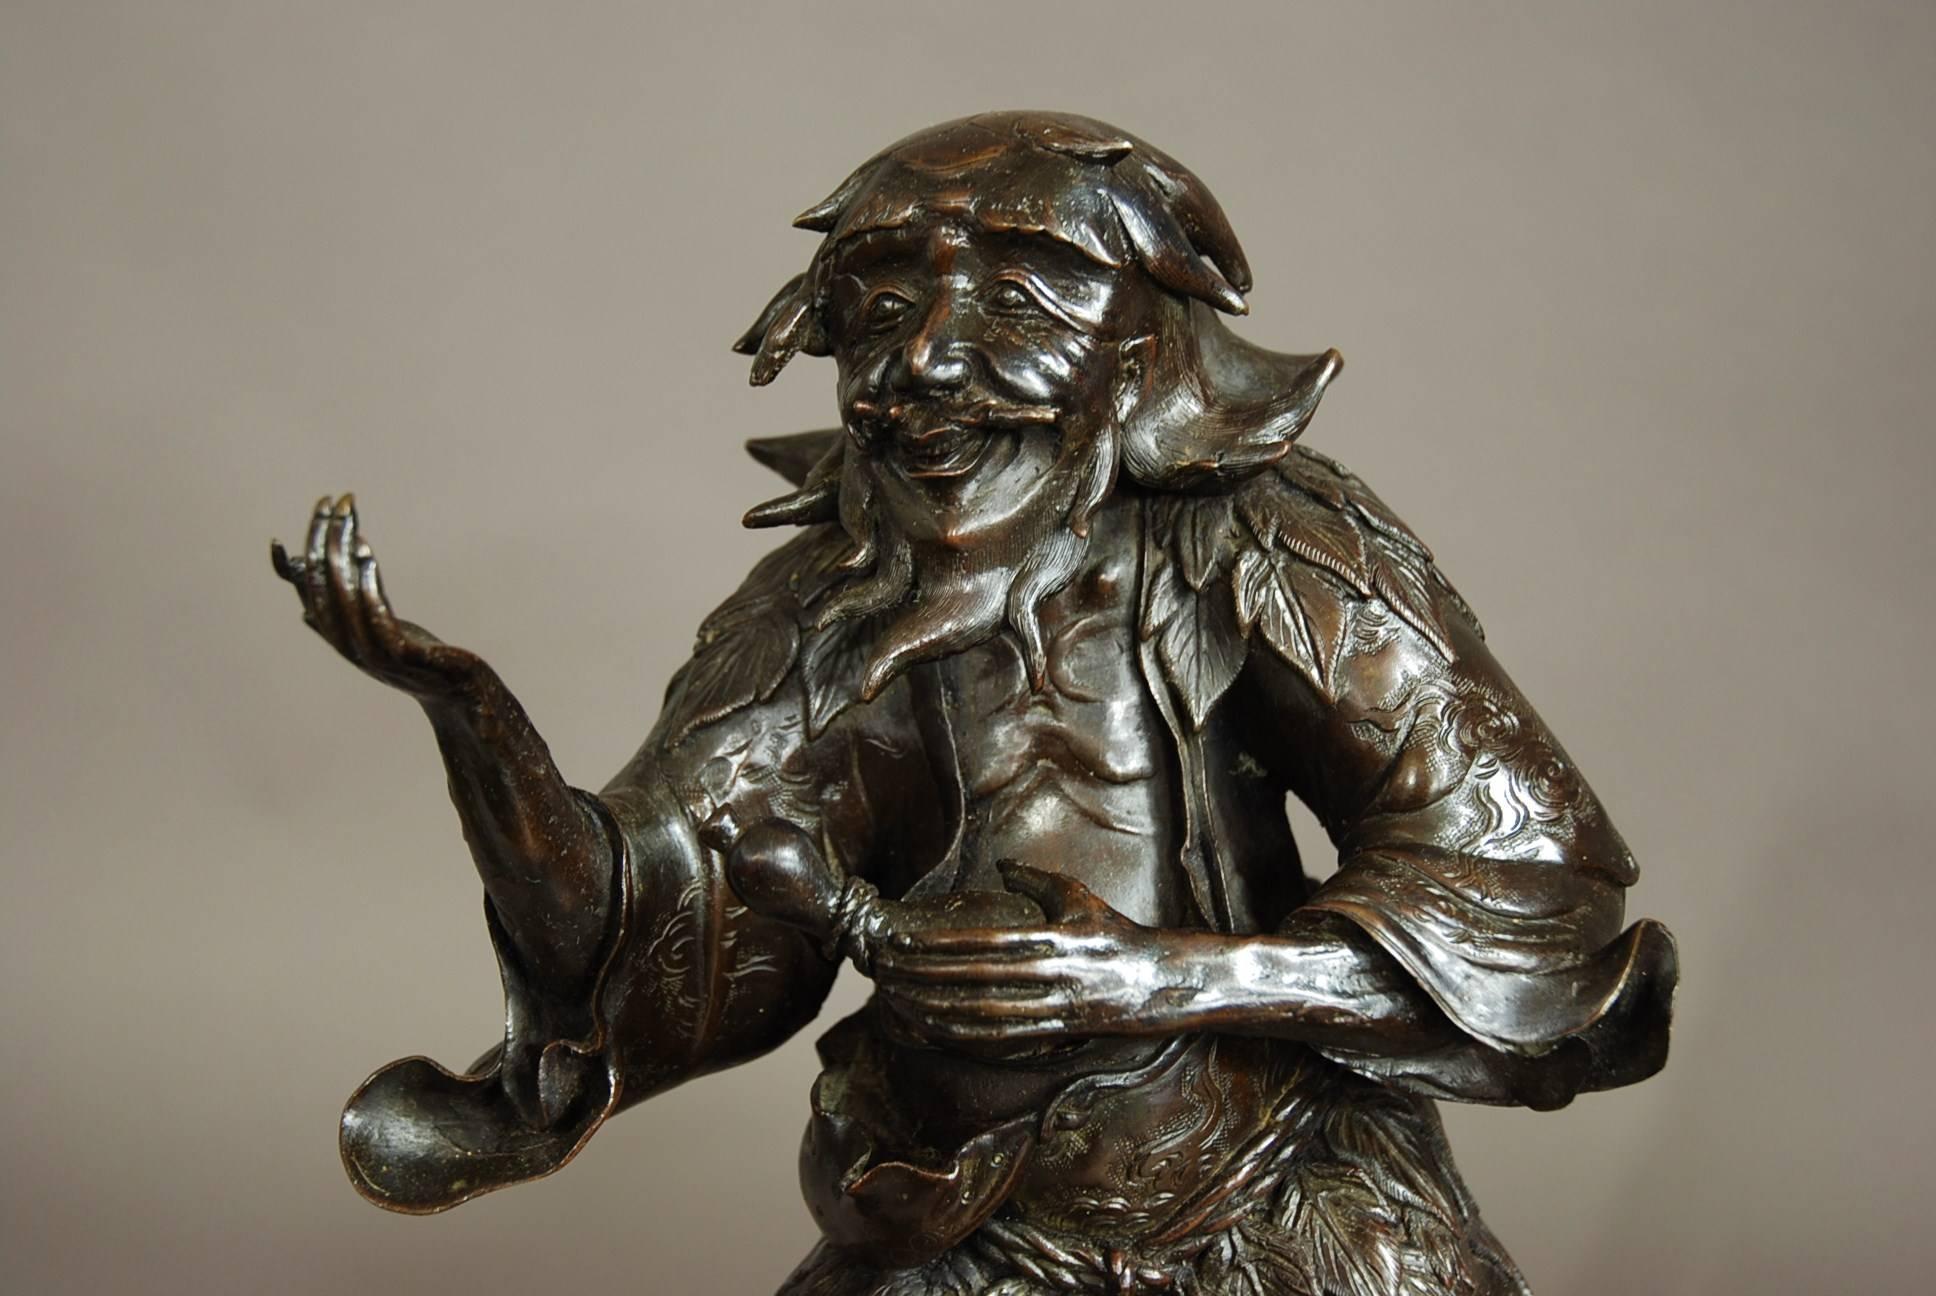 A late 19th century Chinese bronze of a wild man with claw feet.

This long haired, bearded man has the appearance of a wizened old man wearing torn and threadbare clothing with leaves. 

He is depicted standing on a naturalistic bronze base of